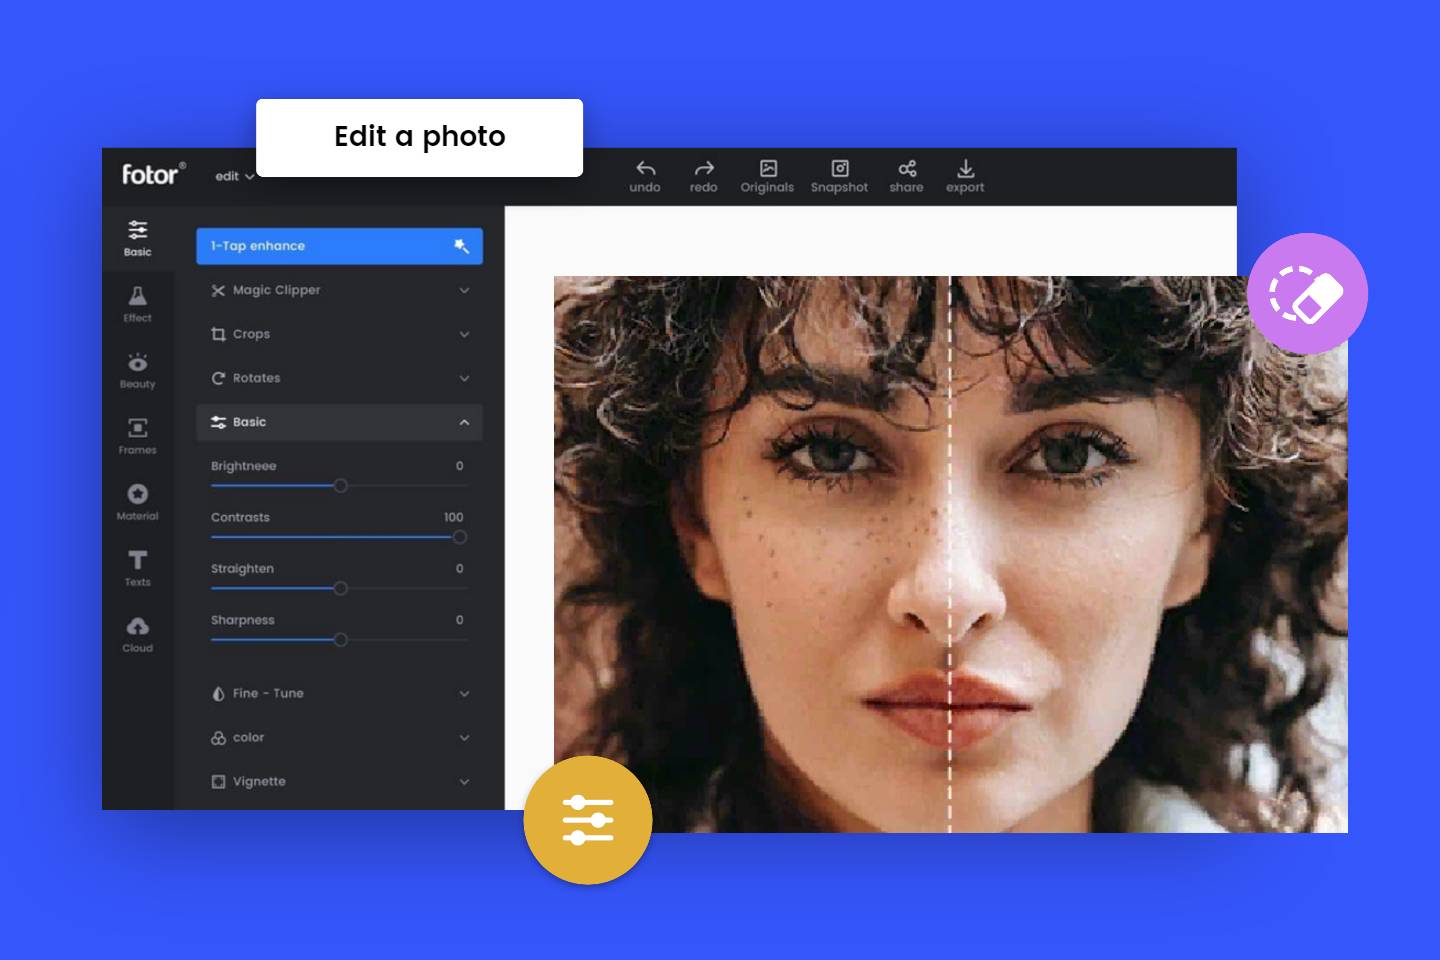 Free online image editor application